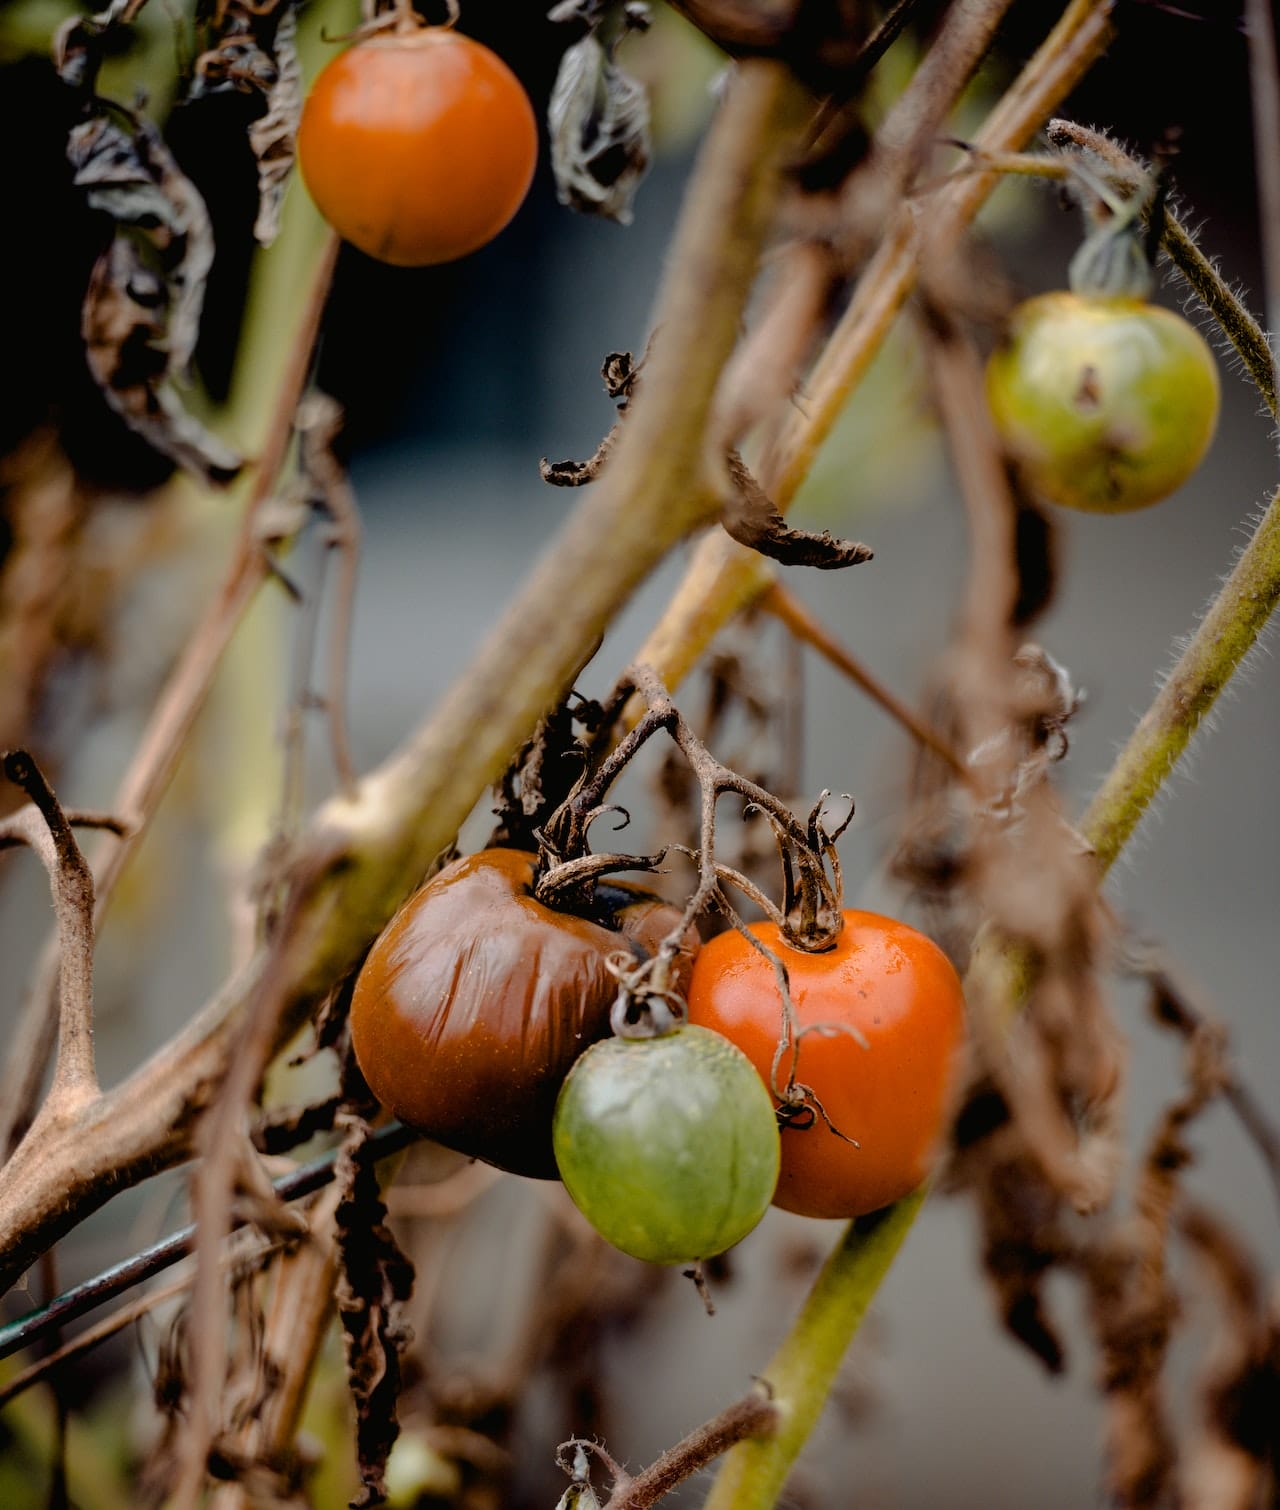 a tomato plant leaves turning brown and curling